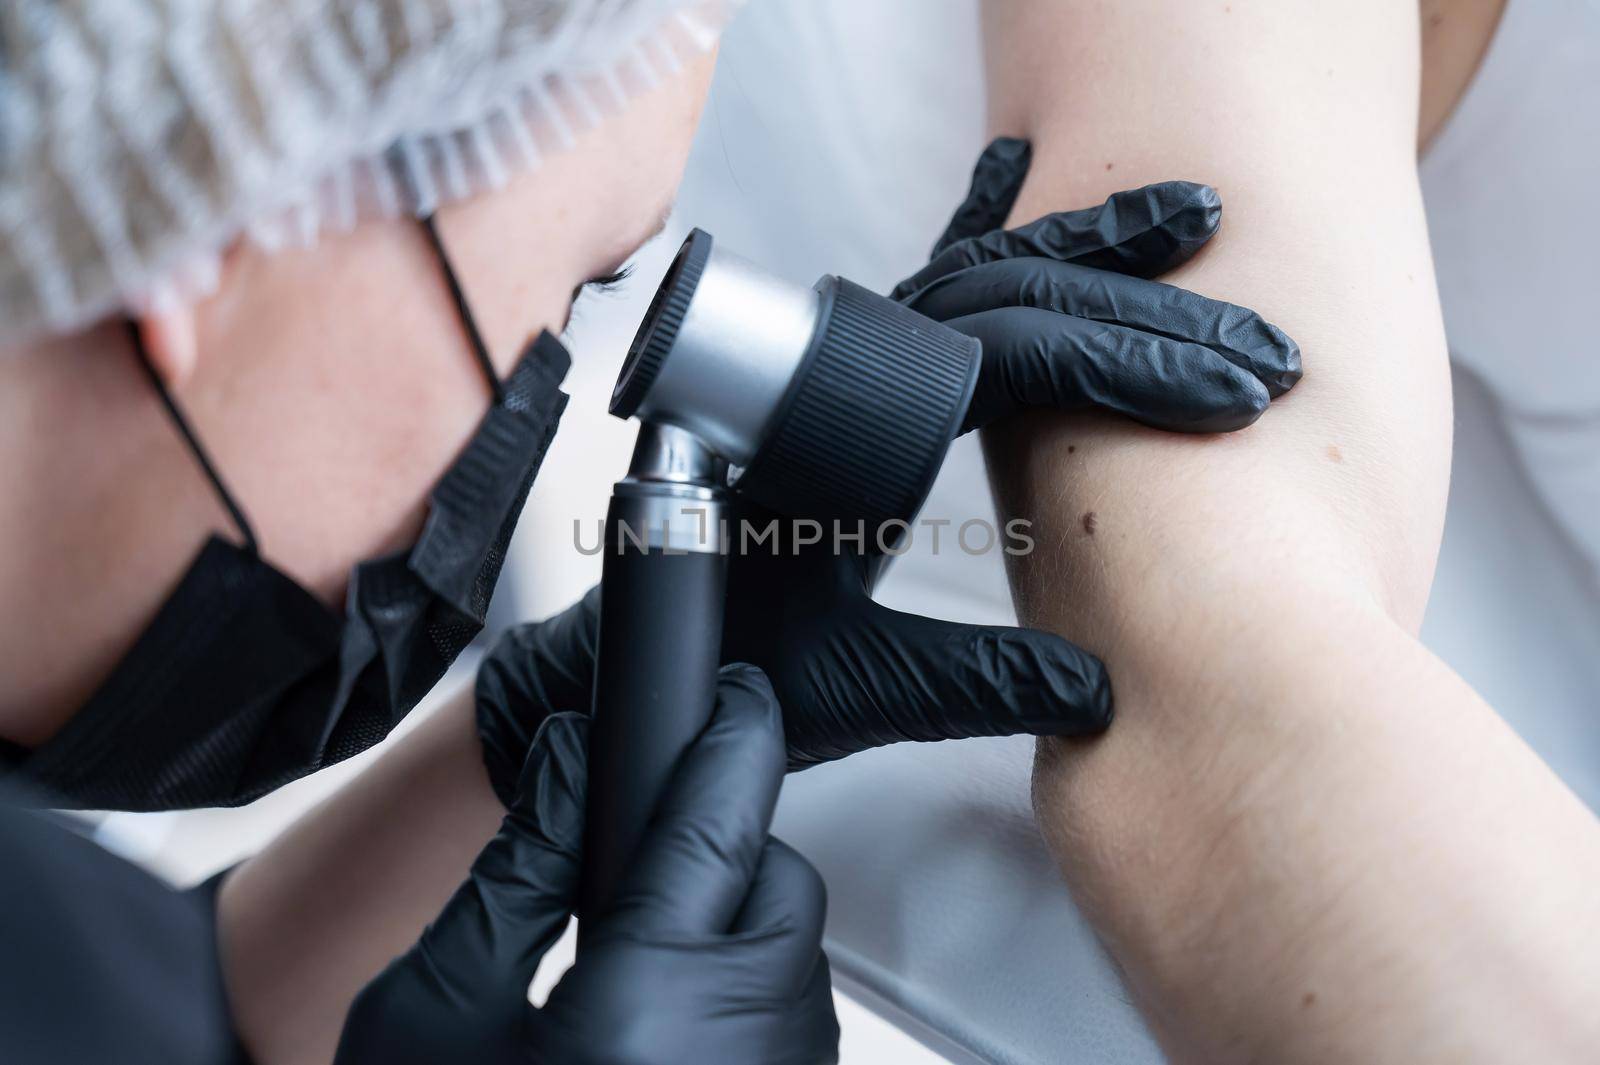 A dermatologist examines a patient's mole through a dermatoscope. by mrwed54